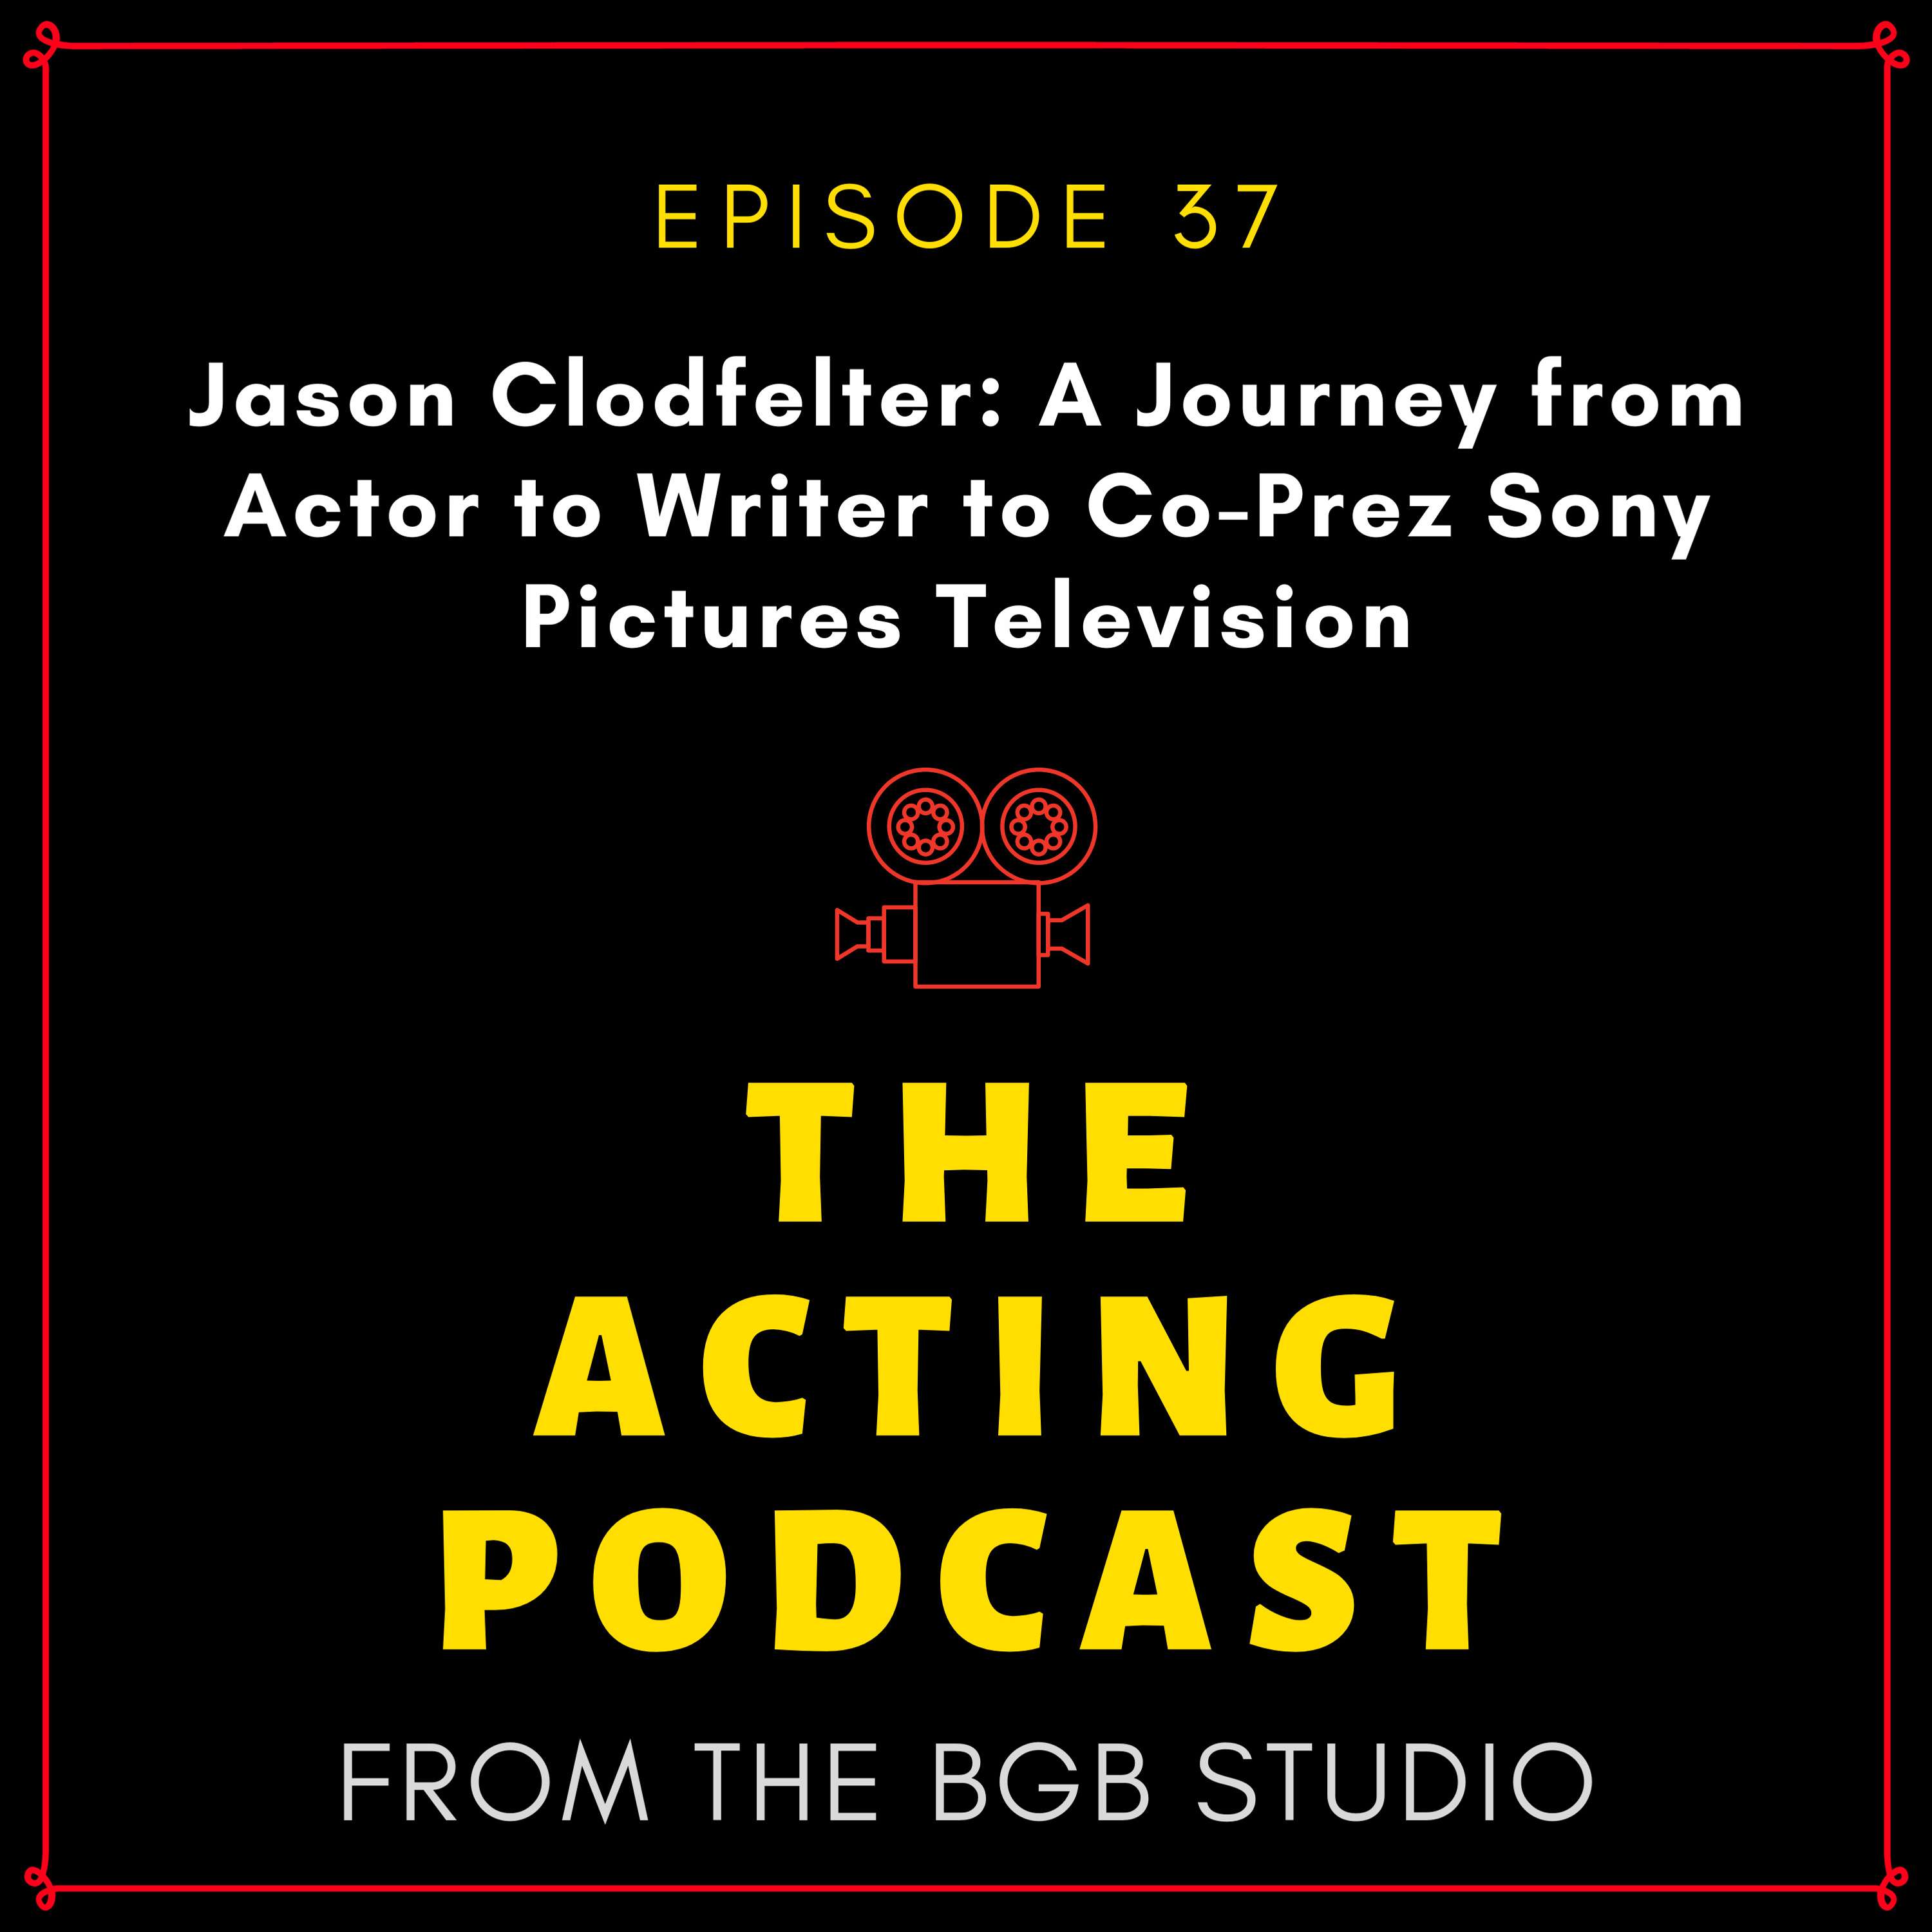 Jason Clodfelter: A Journey from Actor to Writer to Co-Prez Sony Pictures Television